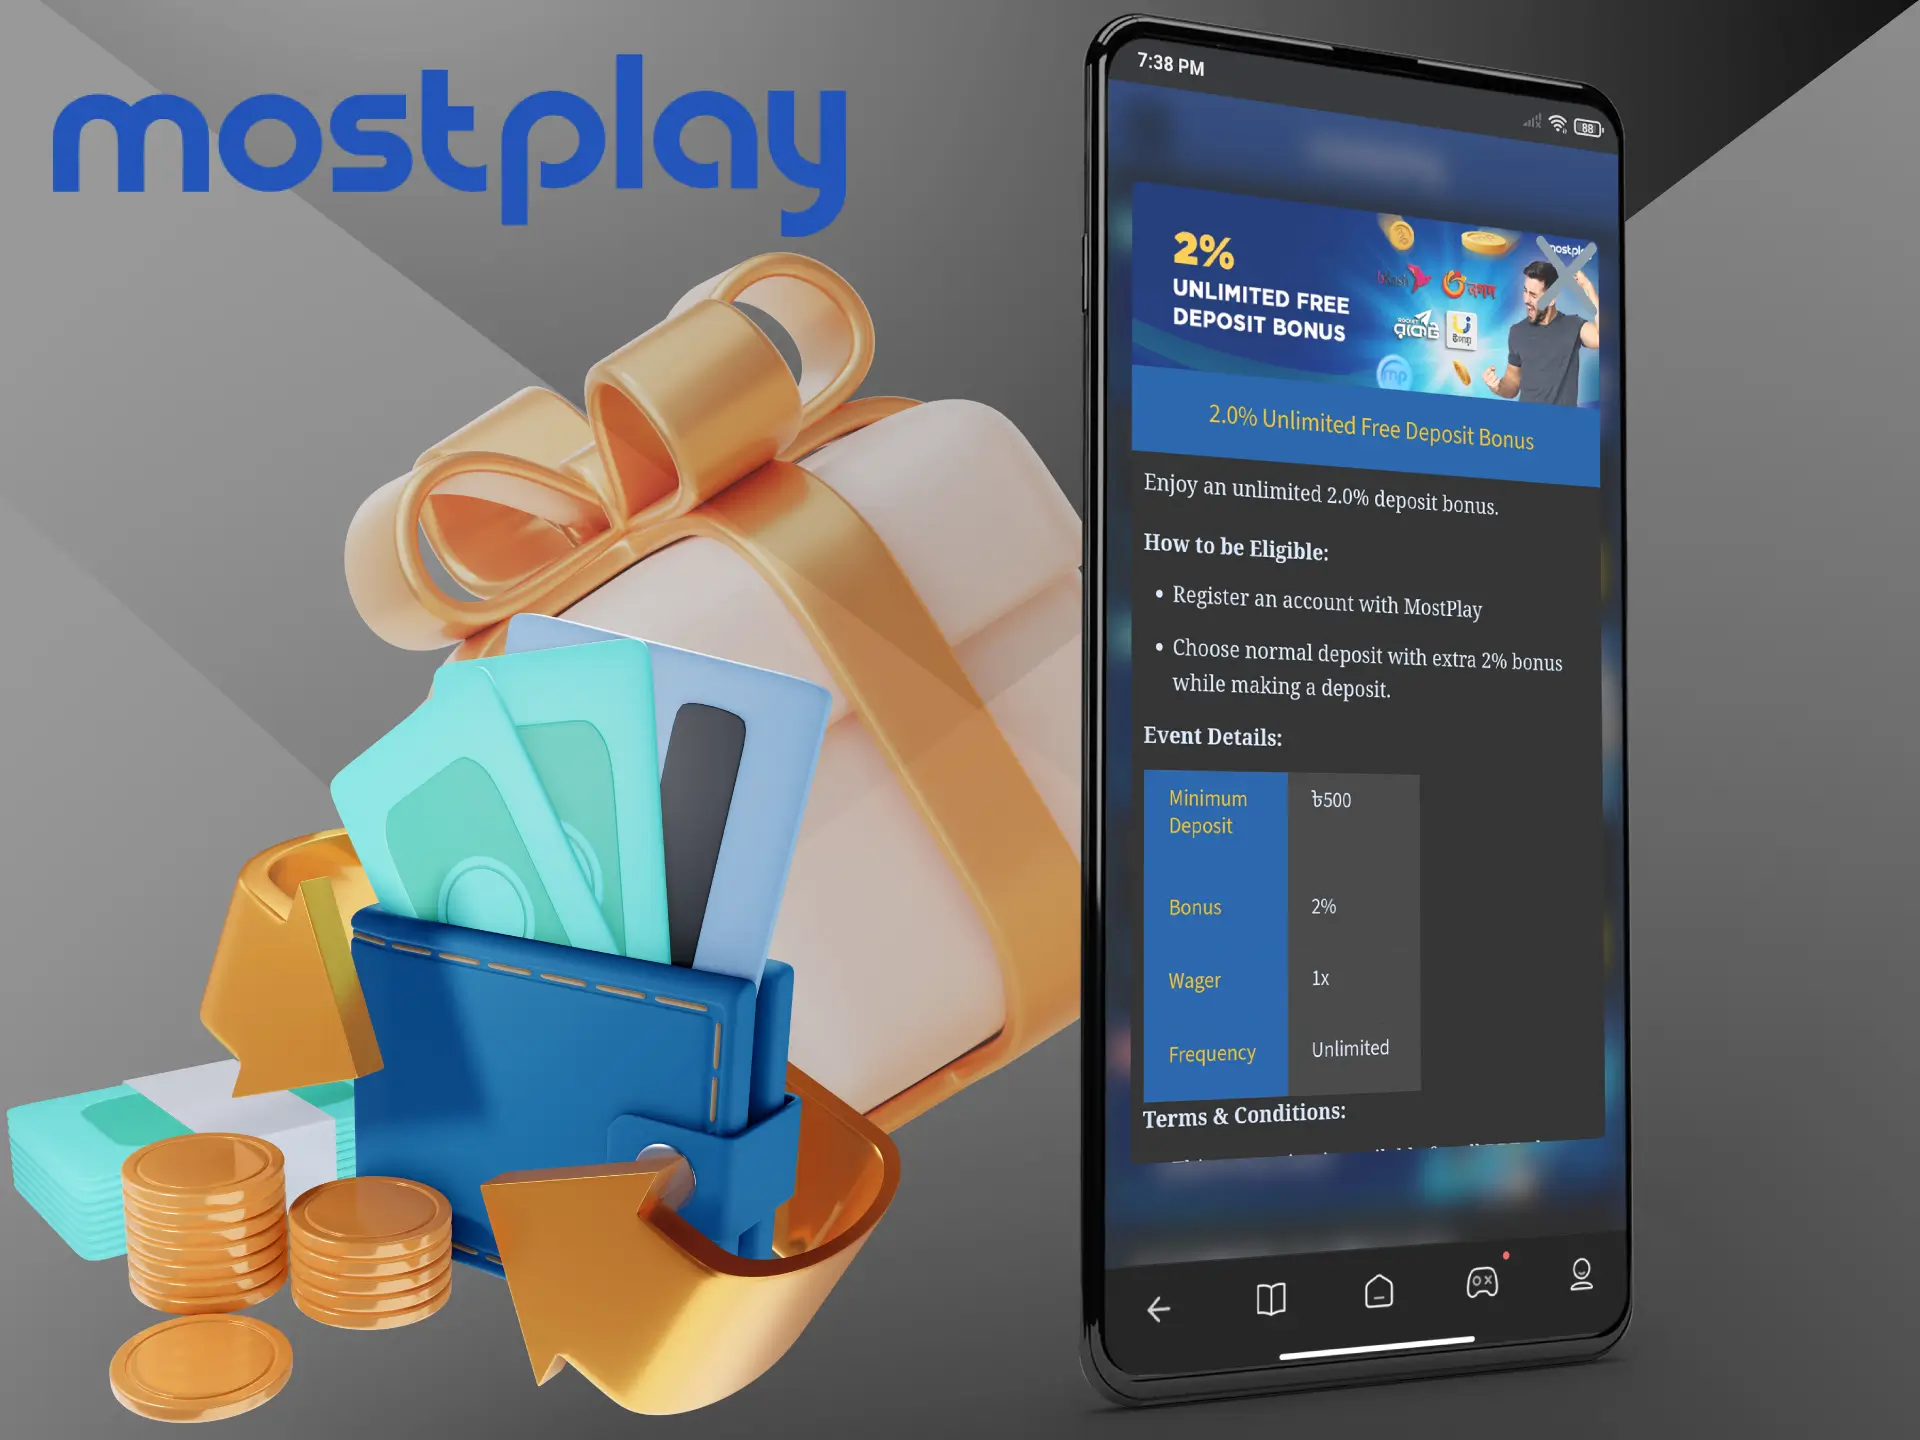 Every deposit you make will increase your balance by 2% thanks to the bonus system from Mostplay Casino.